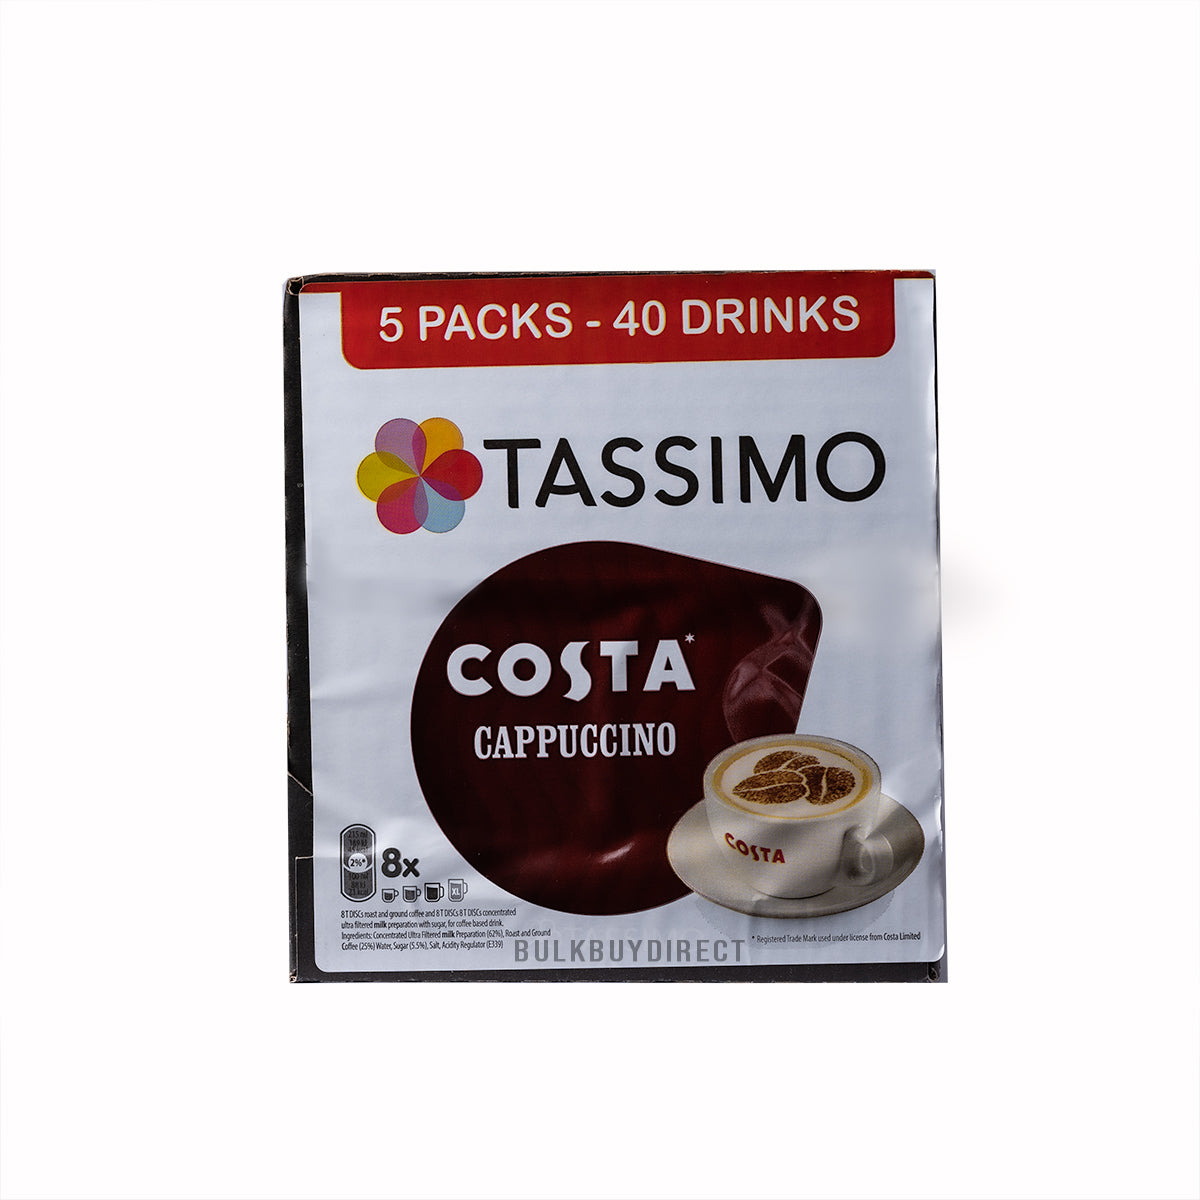 Costa Tassimo Cappuccino Coffee Pods - 40 Servings: Indulge in Barista-Quality Comfort at Home